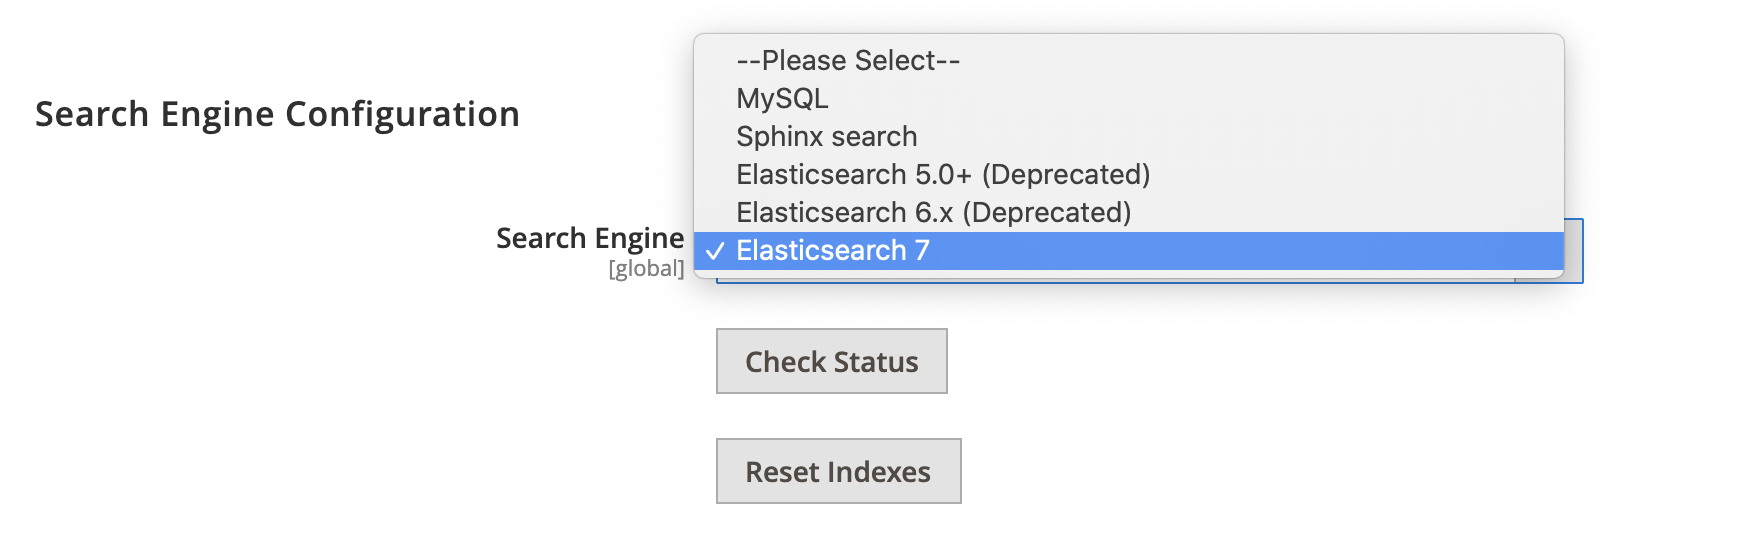 search_engine.png